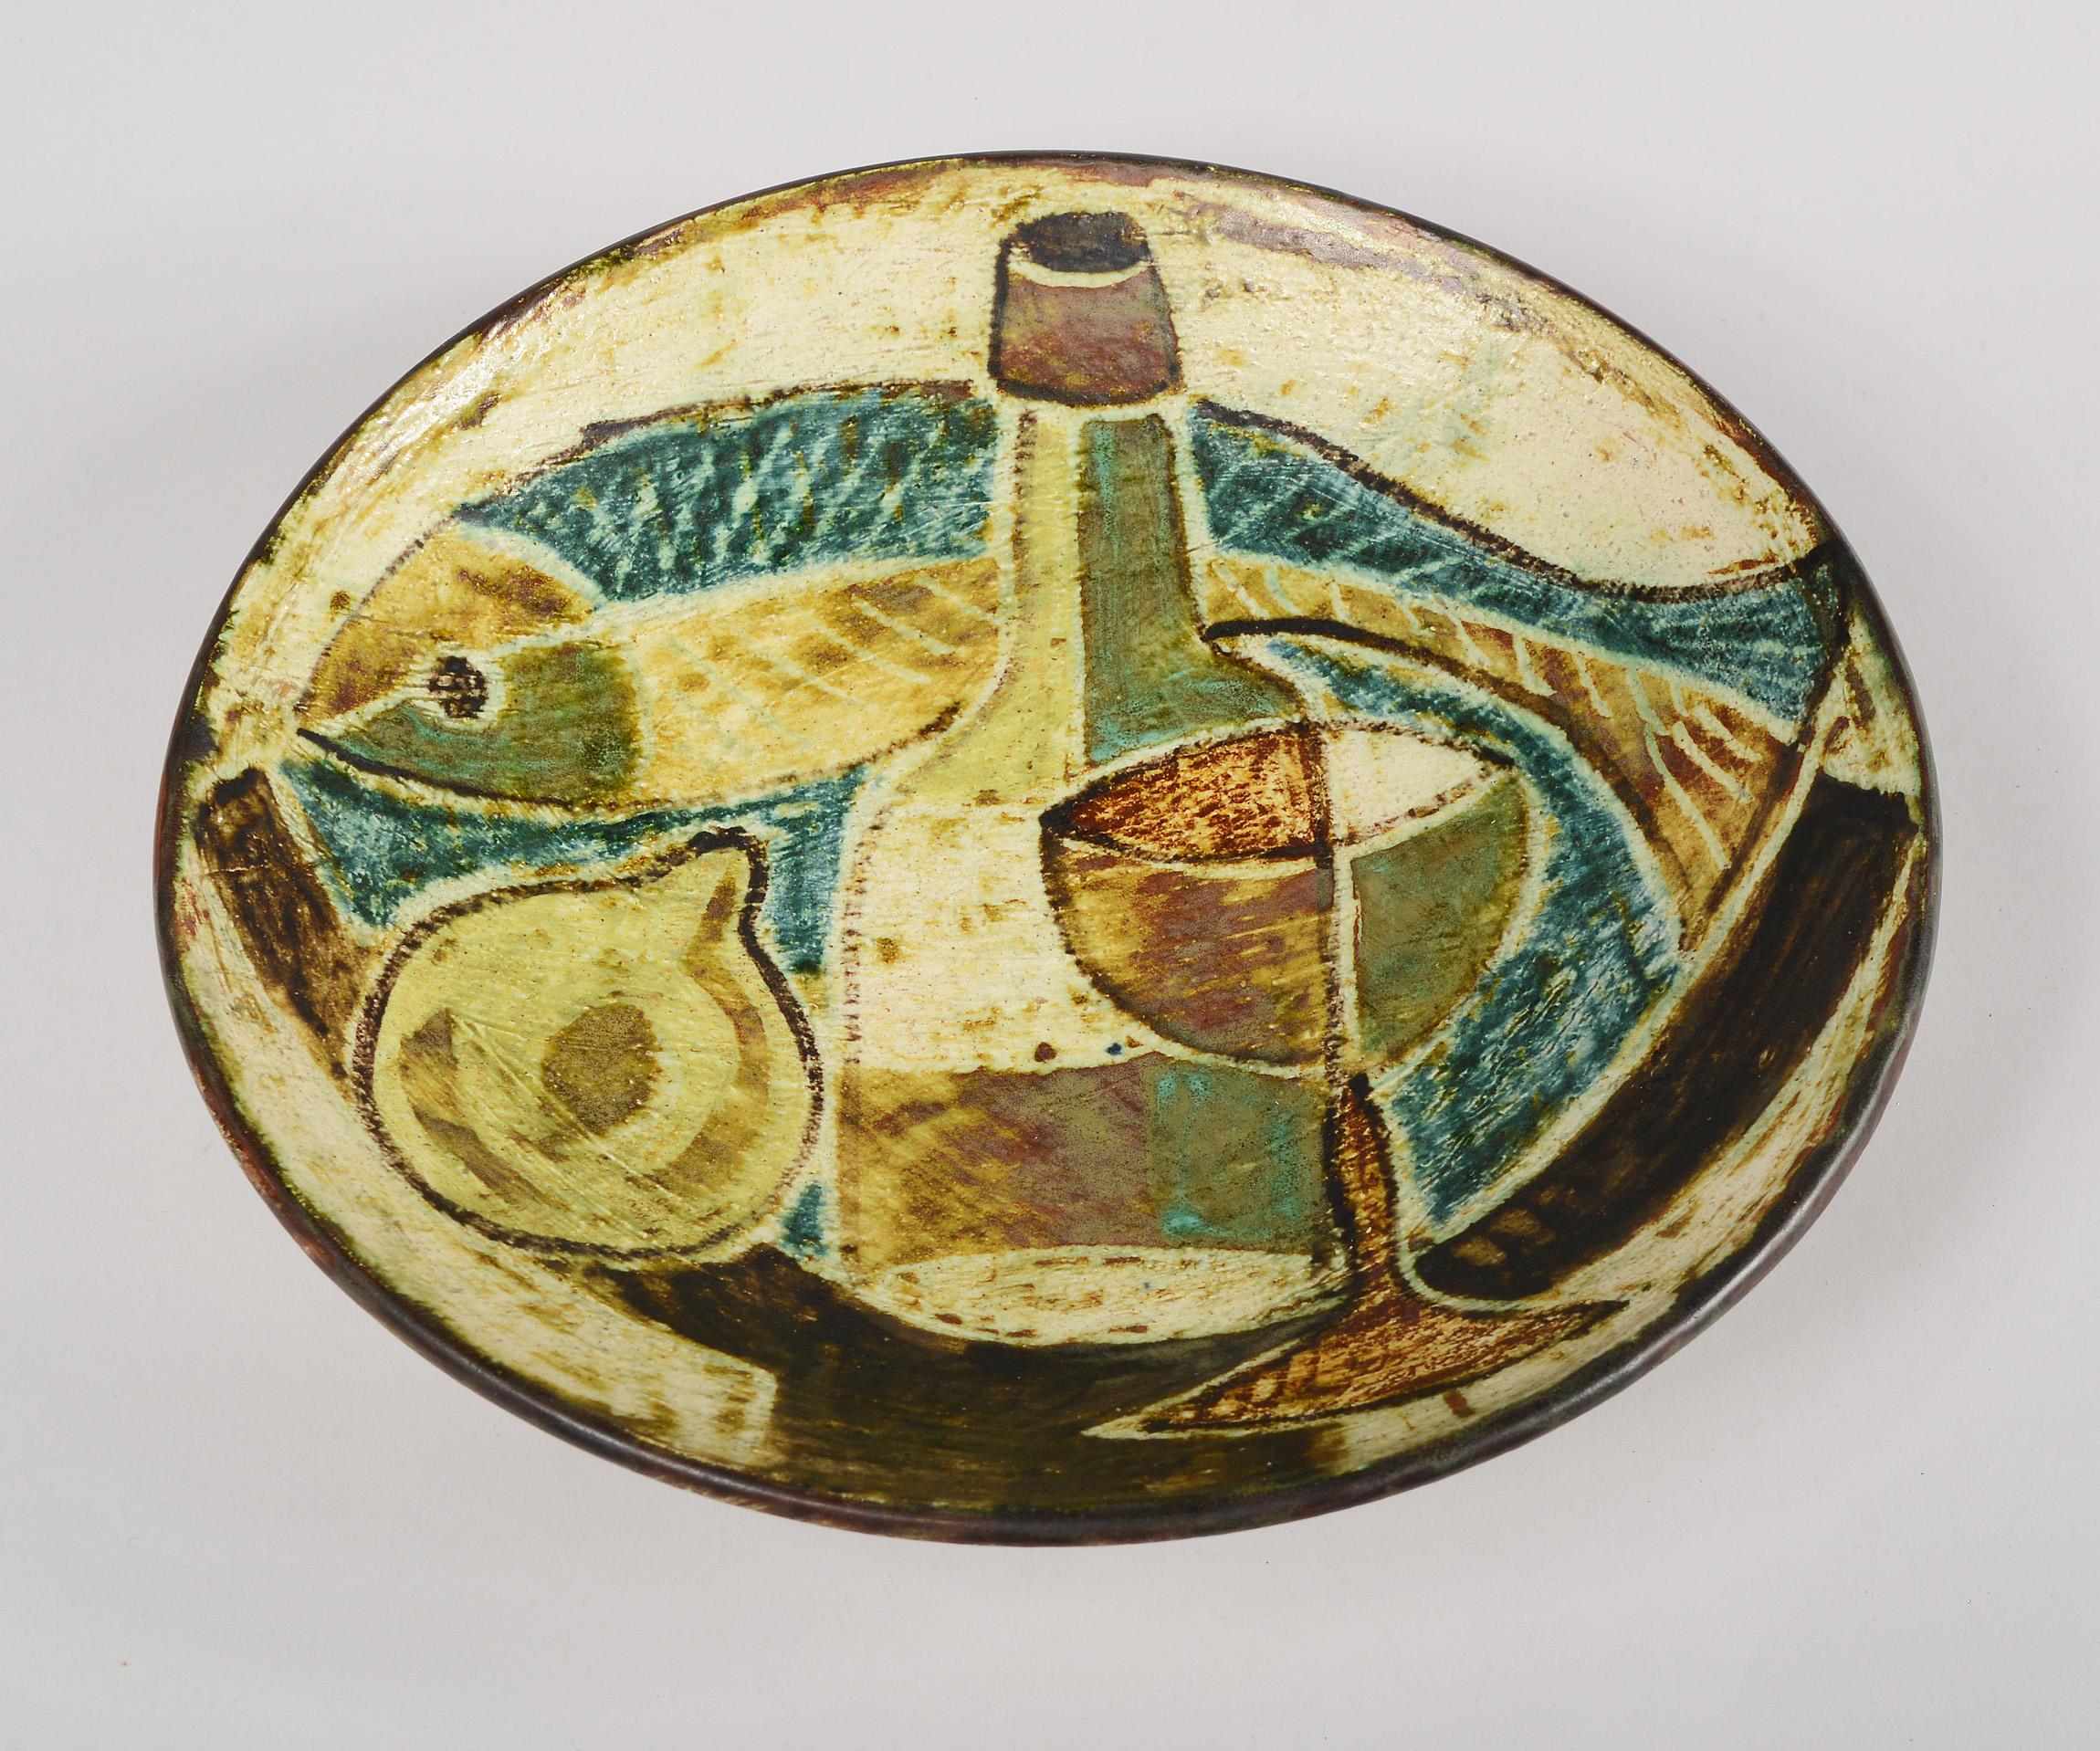 Ceramic bowl by Danish artist Preben Herluf Gottschalk-Olsen, (1915-1968). The cubist still life in the interior of this bowl has a very painterly feel to it. There is texture and brushstrokes to the glaze. The bowl is signed GO and retains the